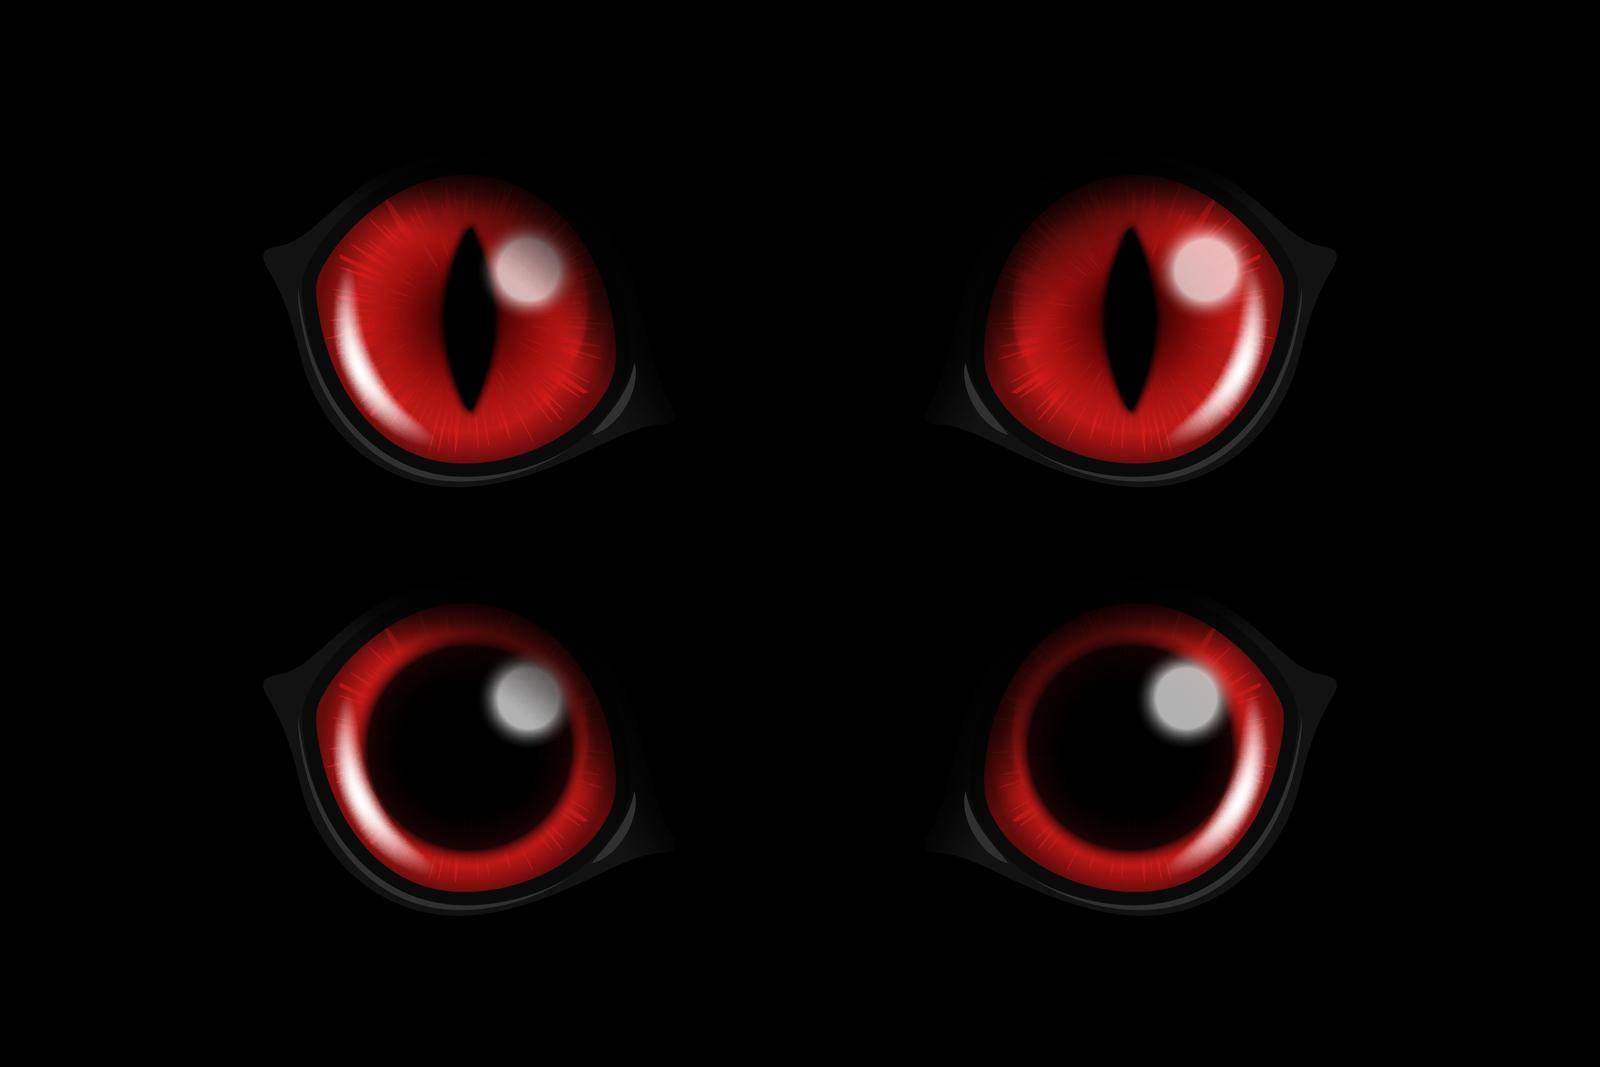 Vector 3d Realistic Red Round Glowing Cats Eyes of a Black Cat Set. Cat Look in the Dark Black Background Closeup. Glowing Cat or Panther Eyes.